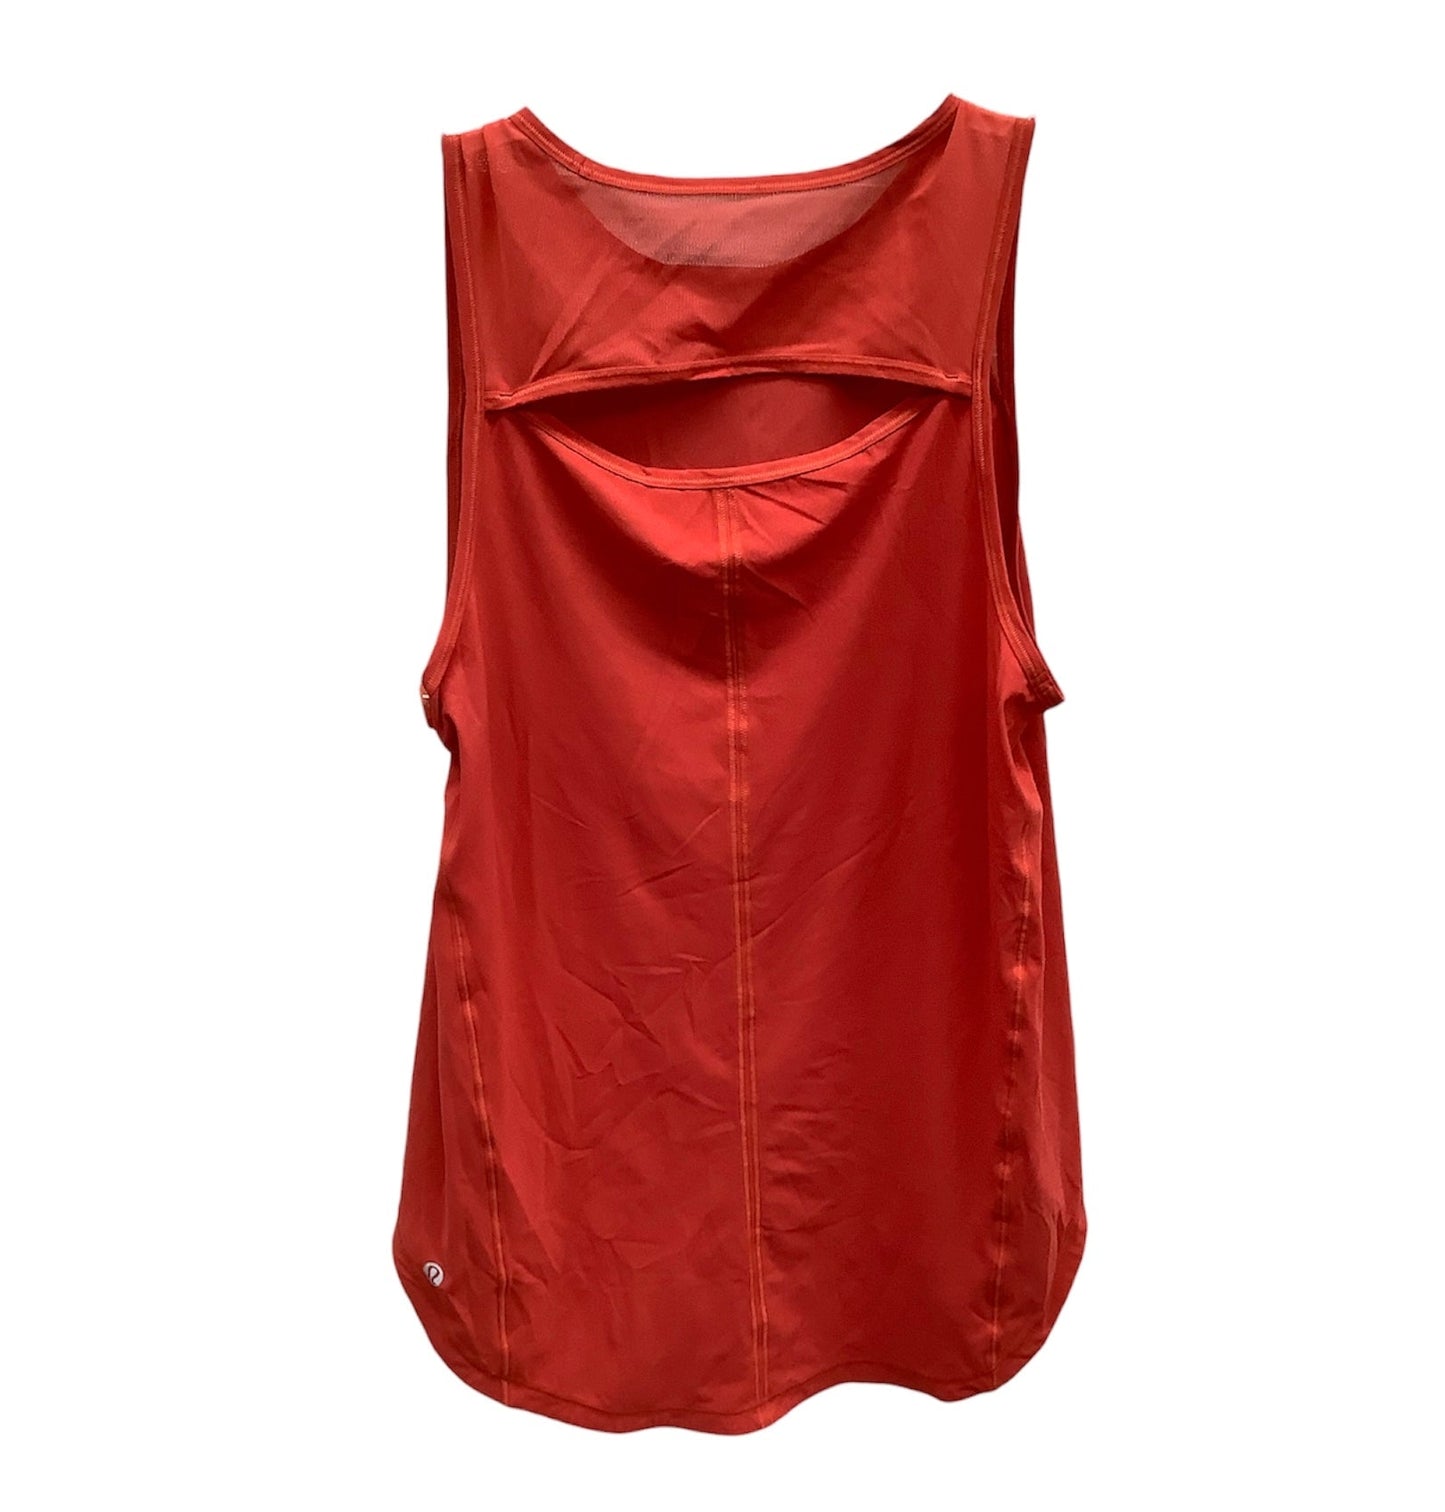 Red Athletic Tank Top Lululemon, Size M